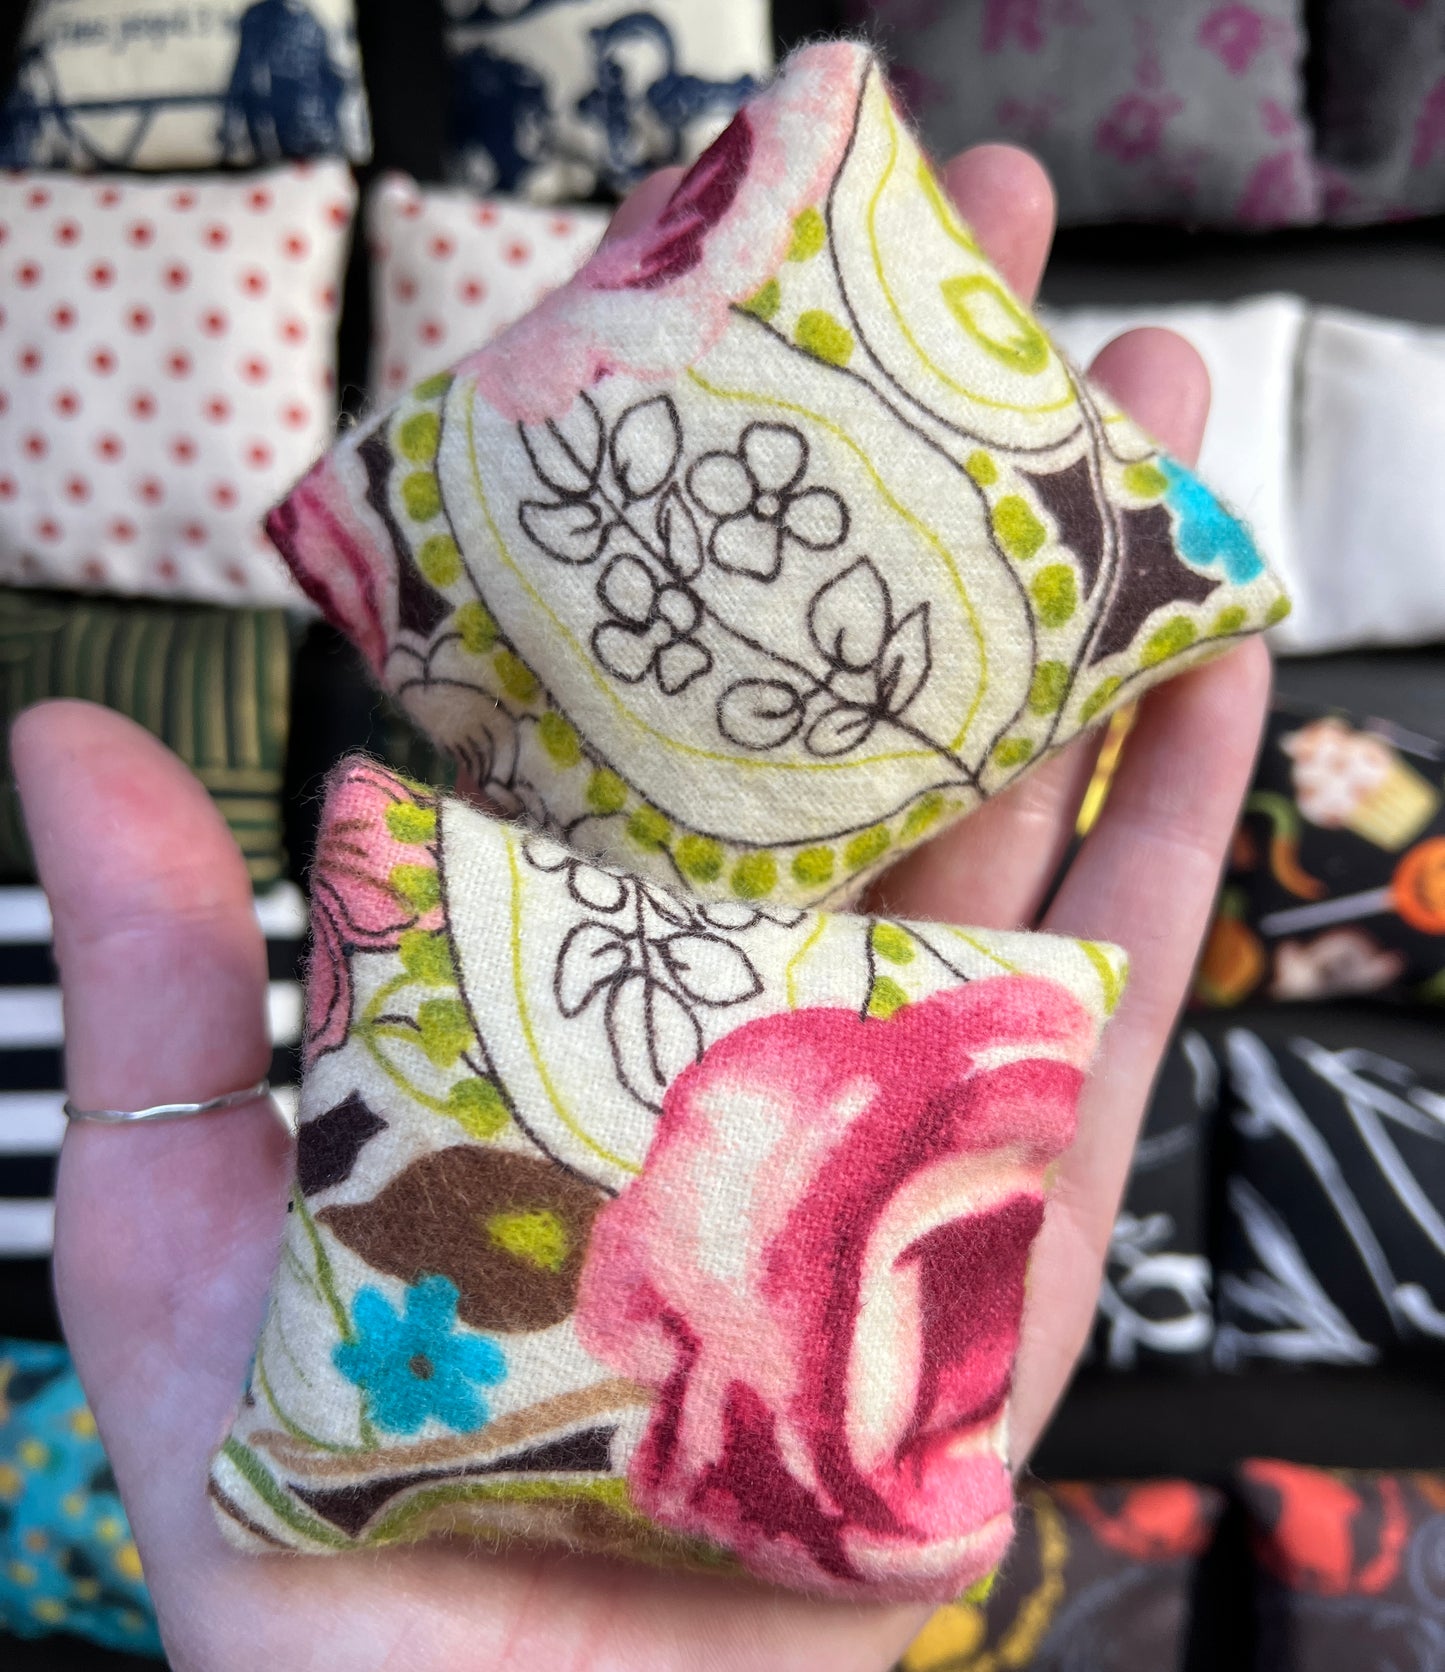 a hand holds a pair of Barbie pillows, for scale. pink rose floral with drawn florals and turquoise flowers. other pillows in distance